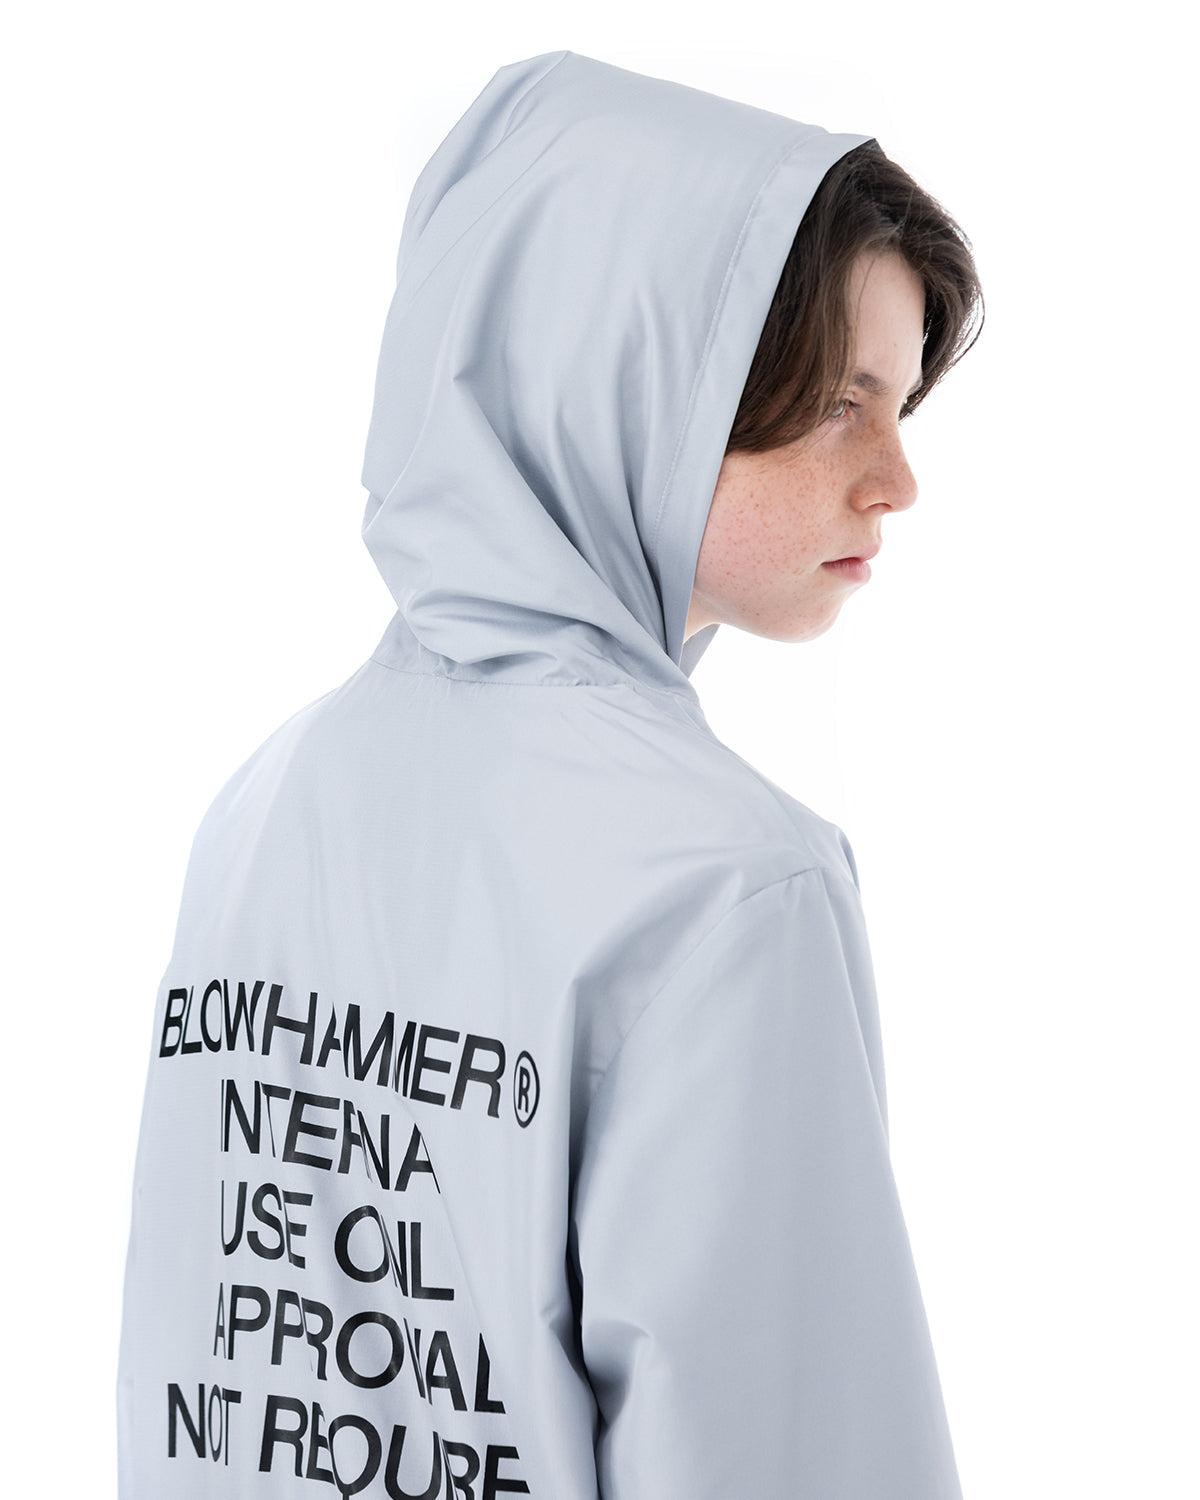 Not Required Green  Windbreaker | Blowhammer